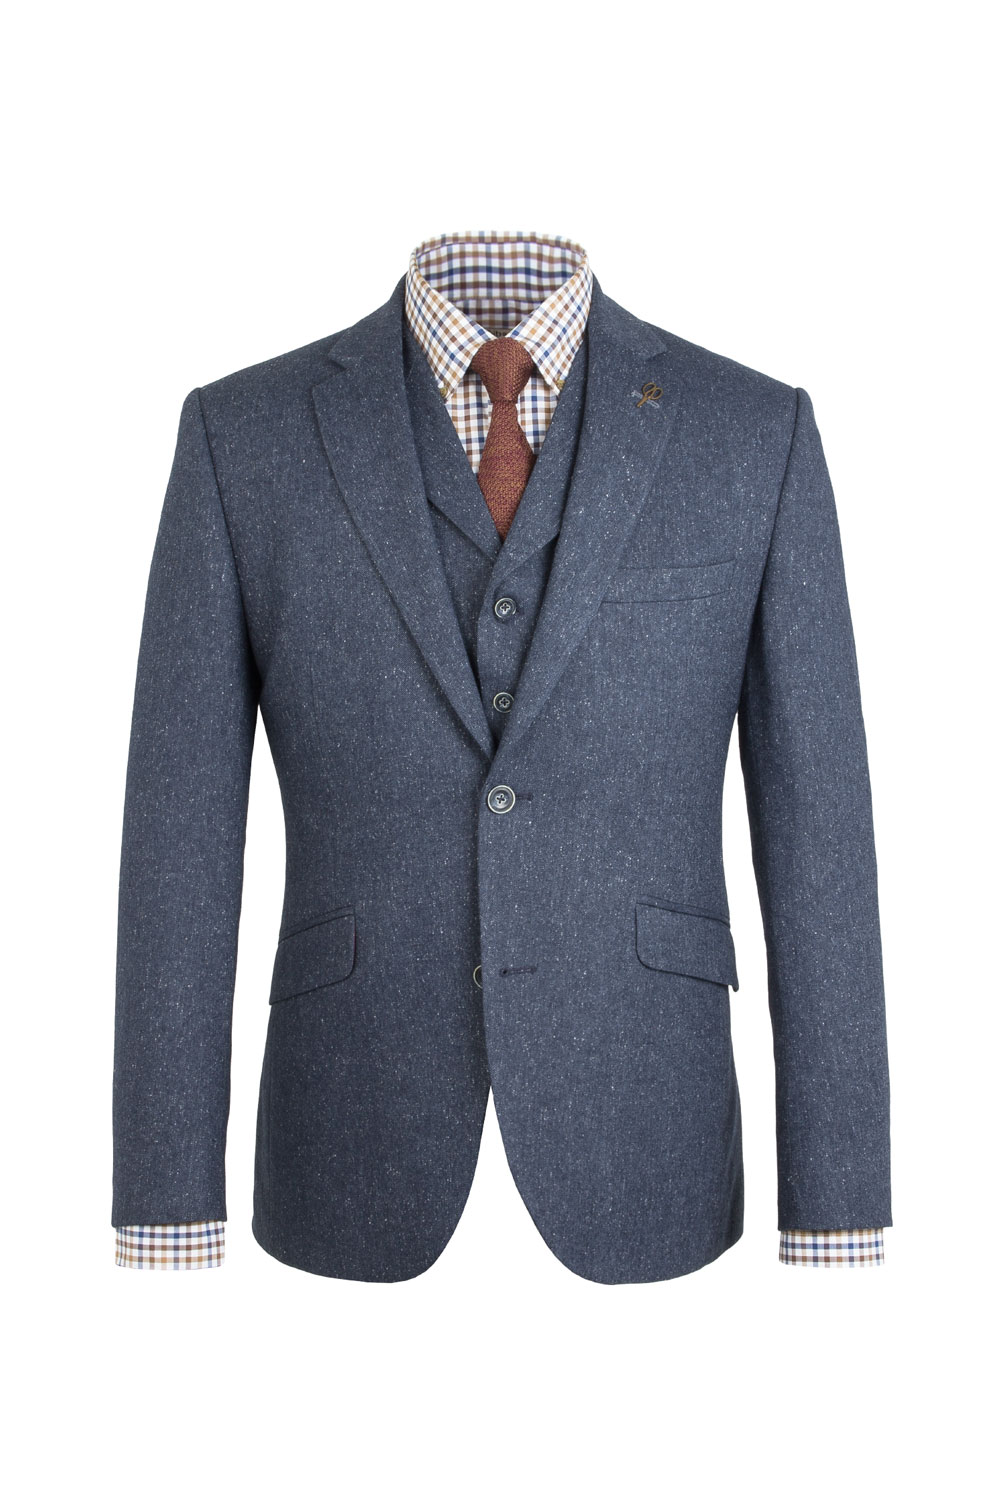 Blue Donegal Tweed 3 Piece Suit - Tom Murphy's Formal and Menswear